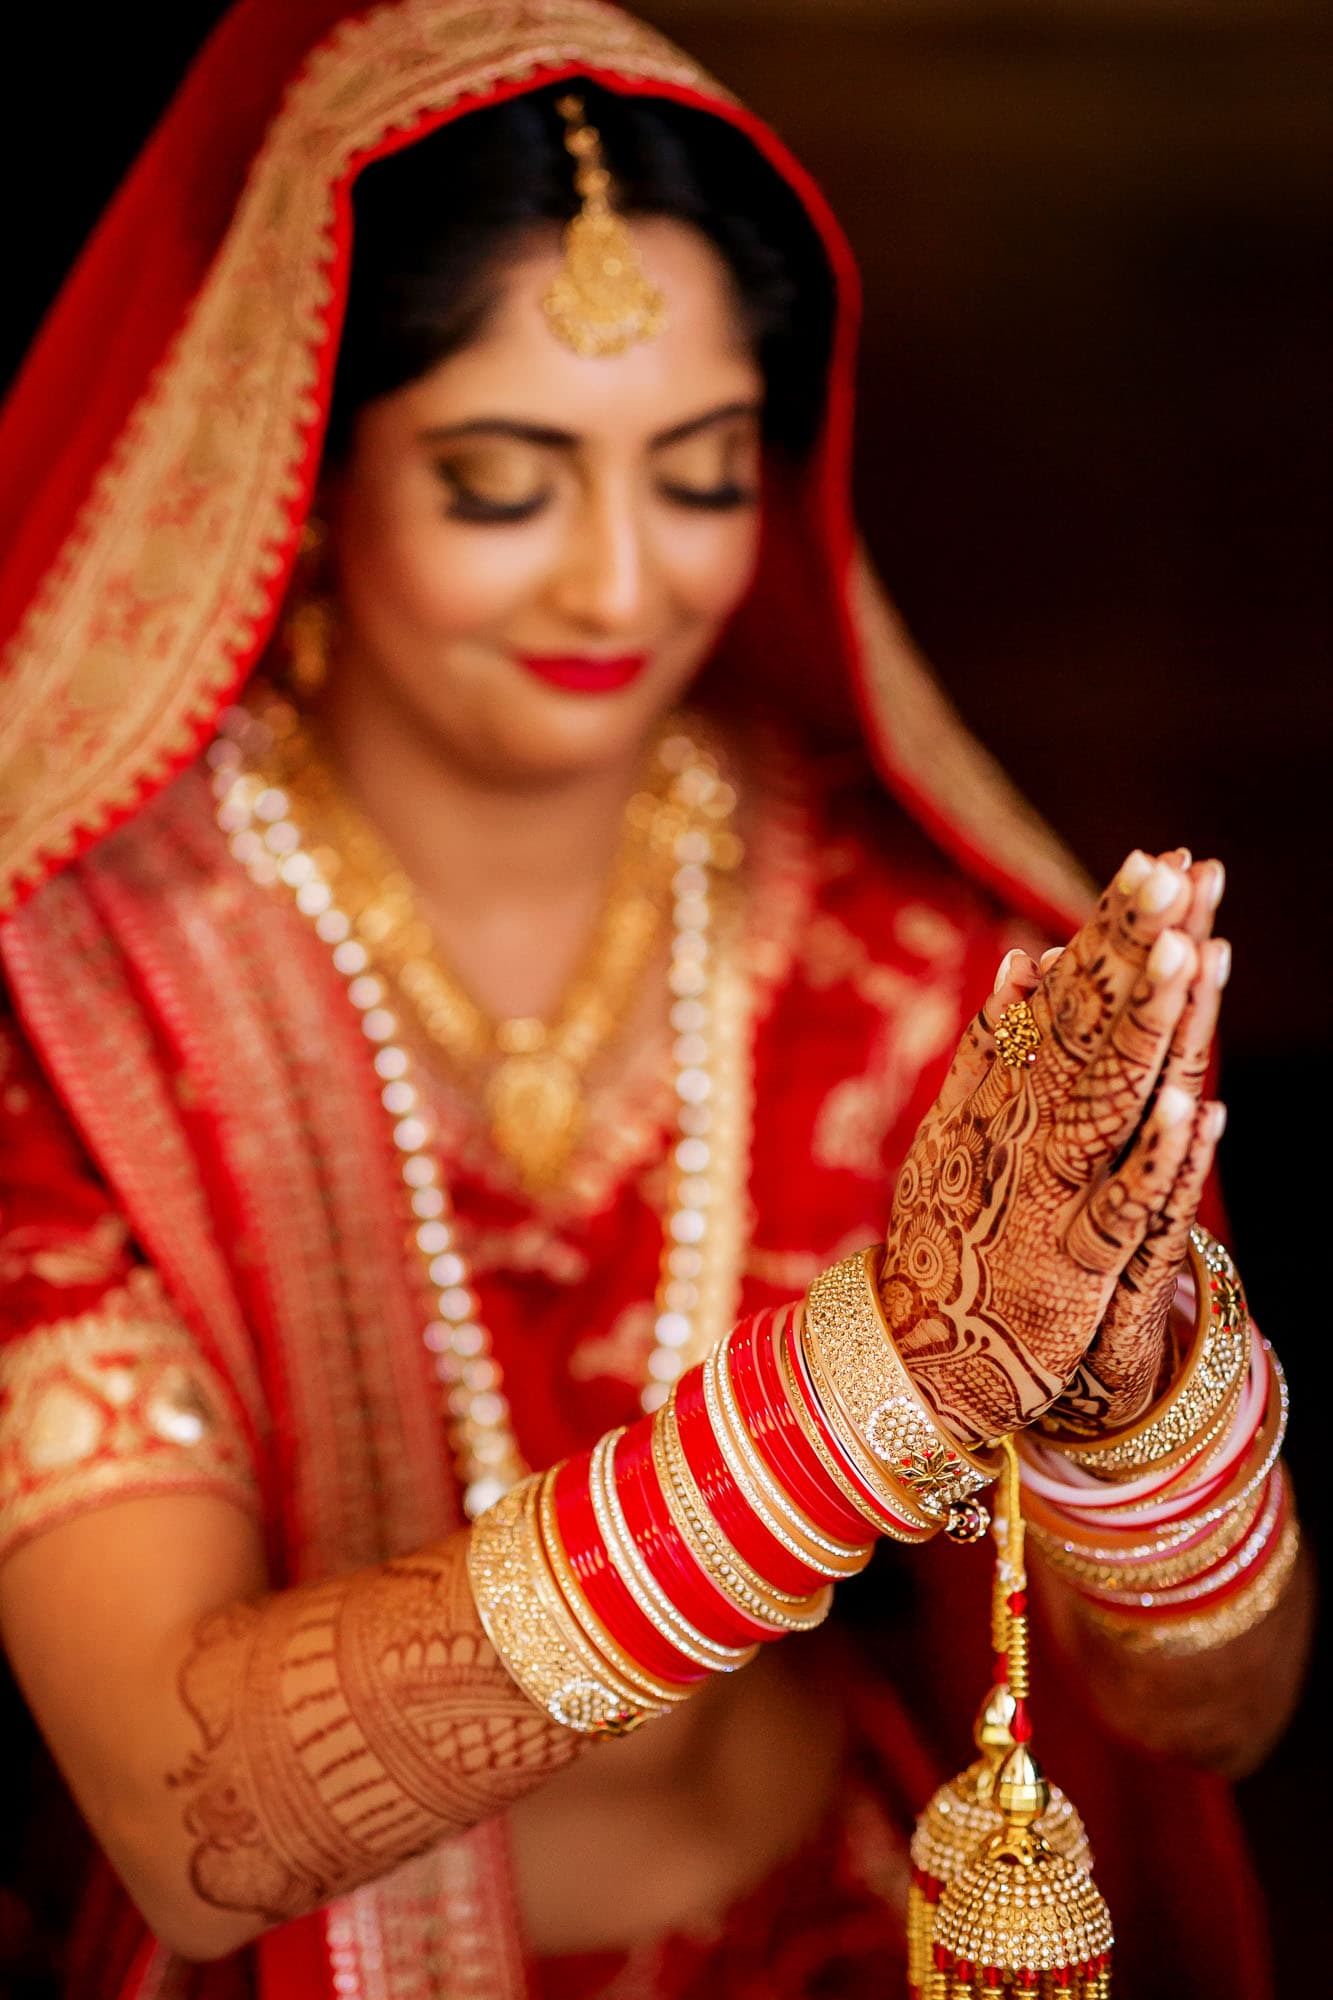 The bride is ready for her traditional Hindu Muslim wedding ceremony.